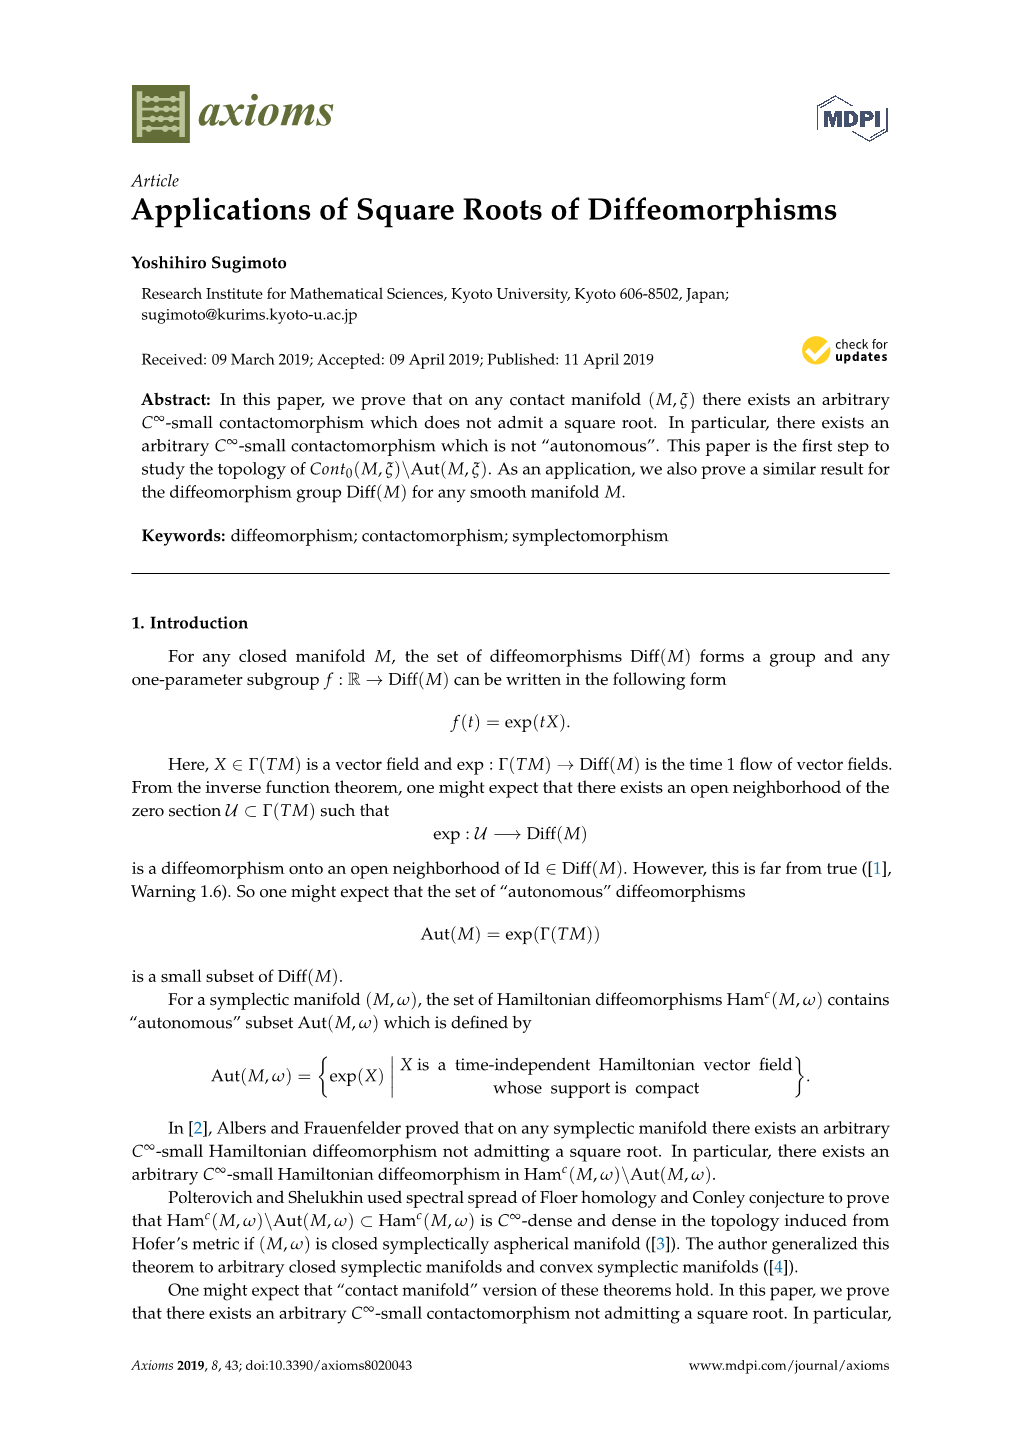 Applications of Square Roots of Diffeomorphisms